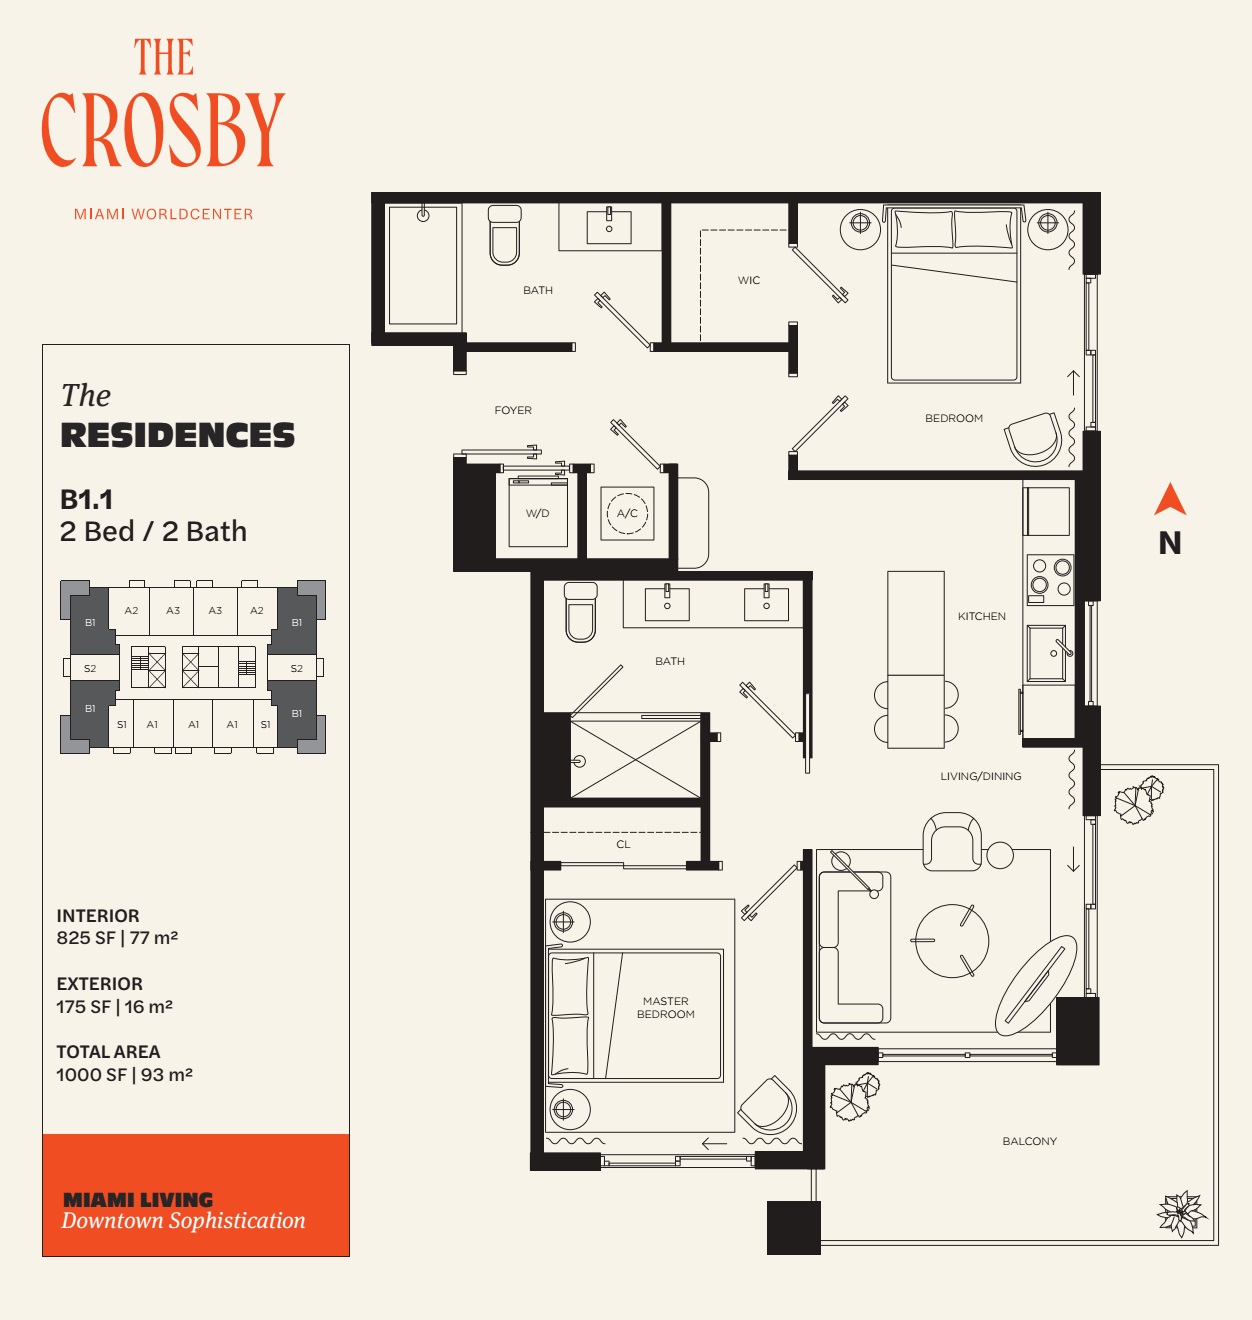 The Crosby Miami Worldcenter Residence B1.1